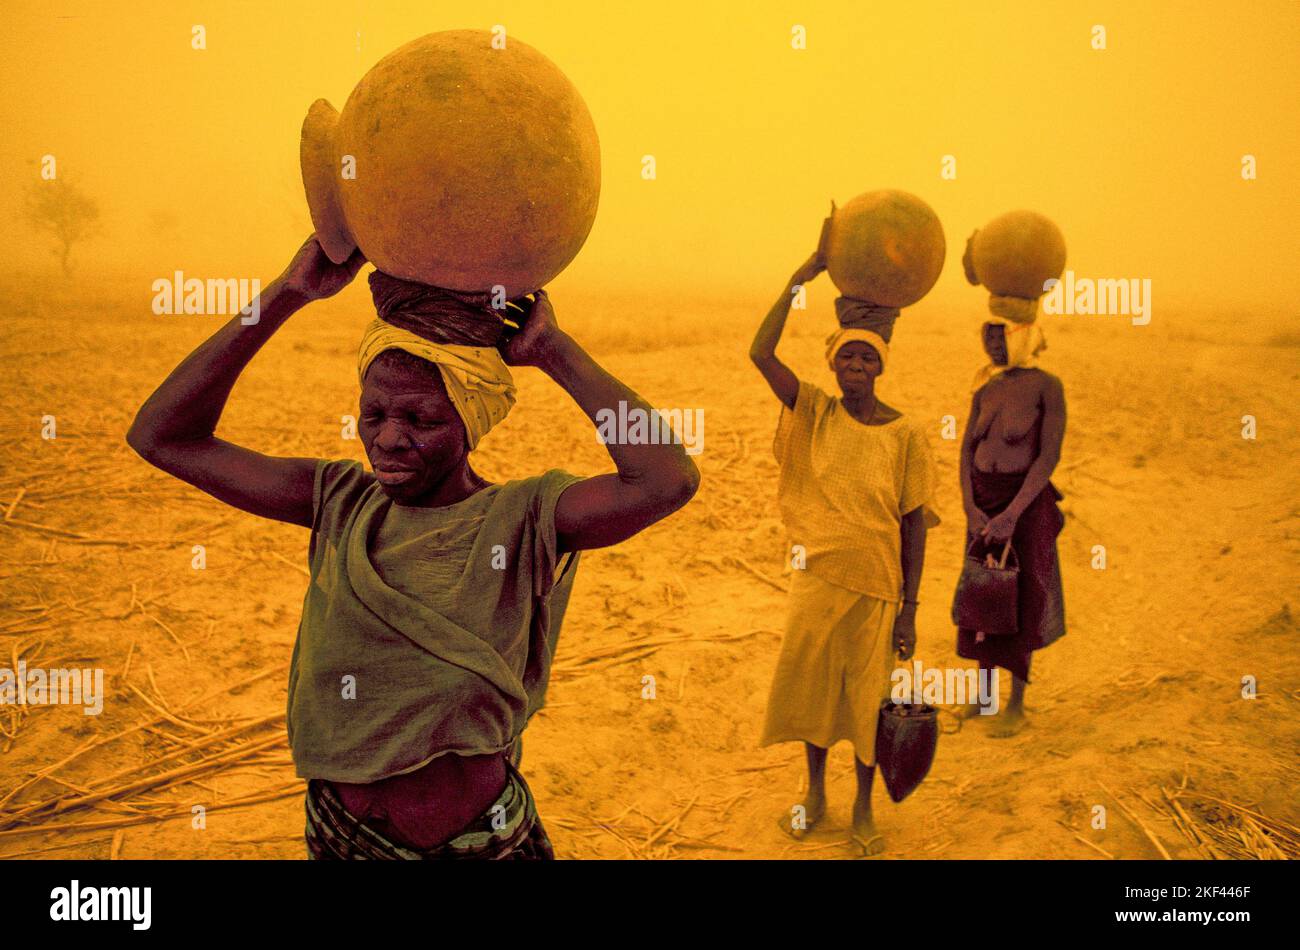 Burkina Faso. Women are carrying water to their village during a sandstorm. Stock Photo